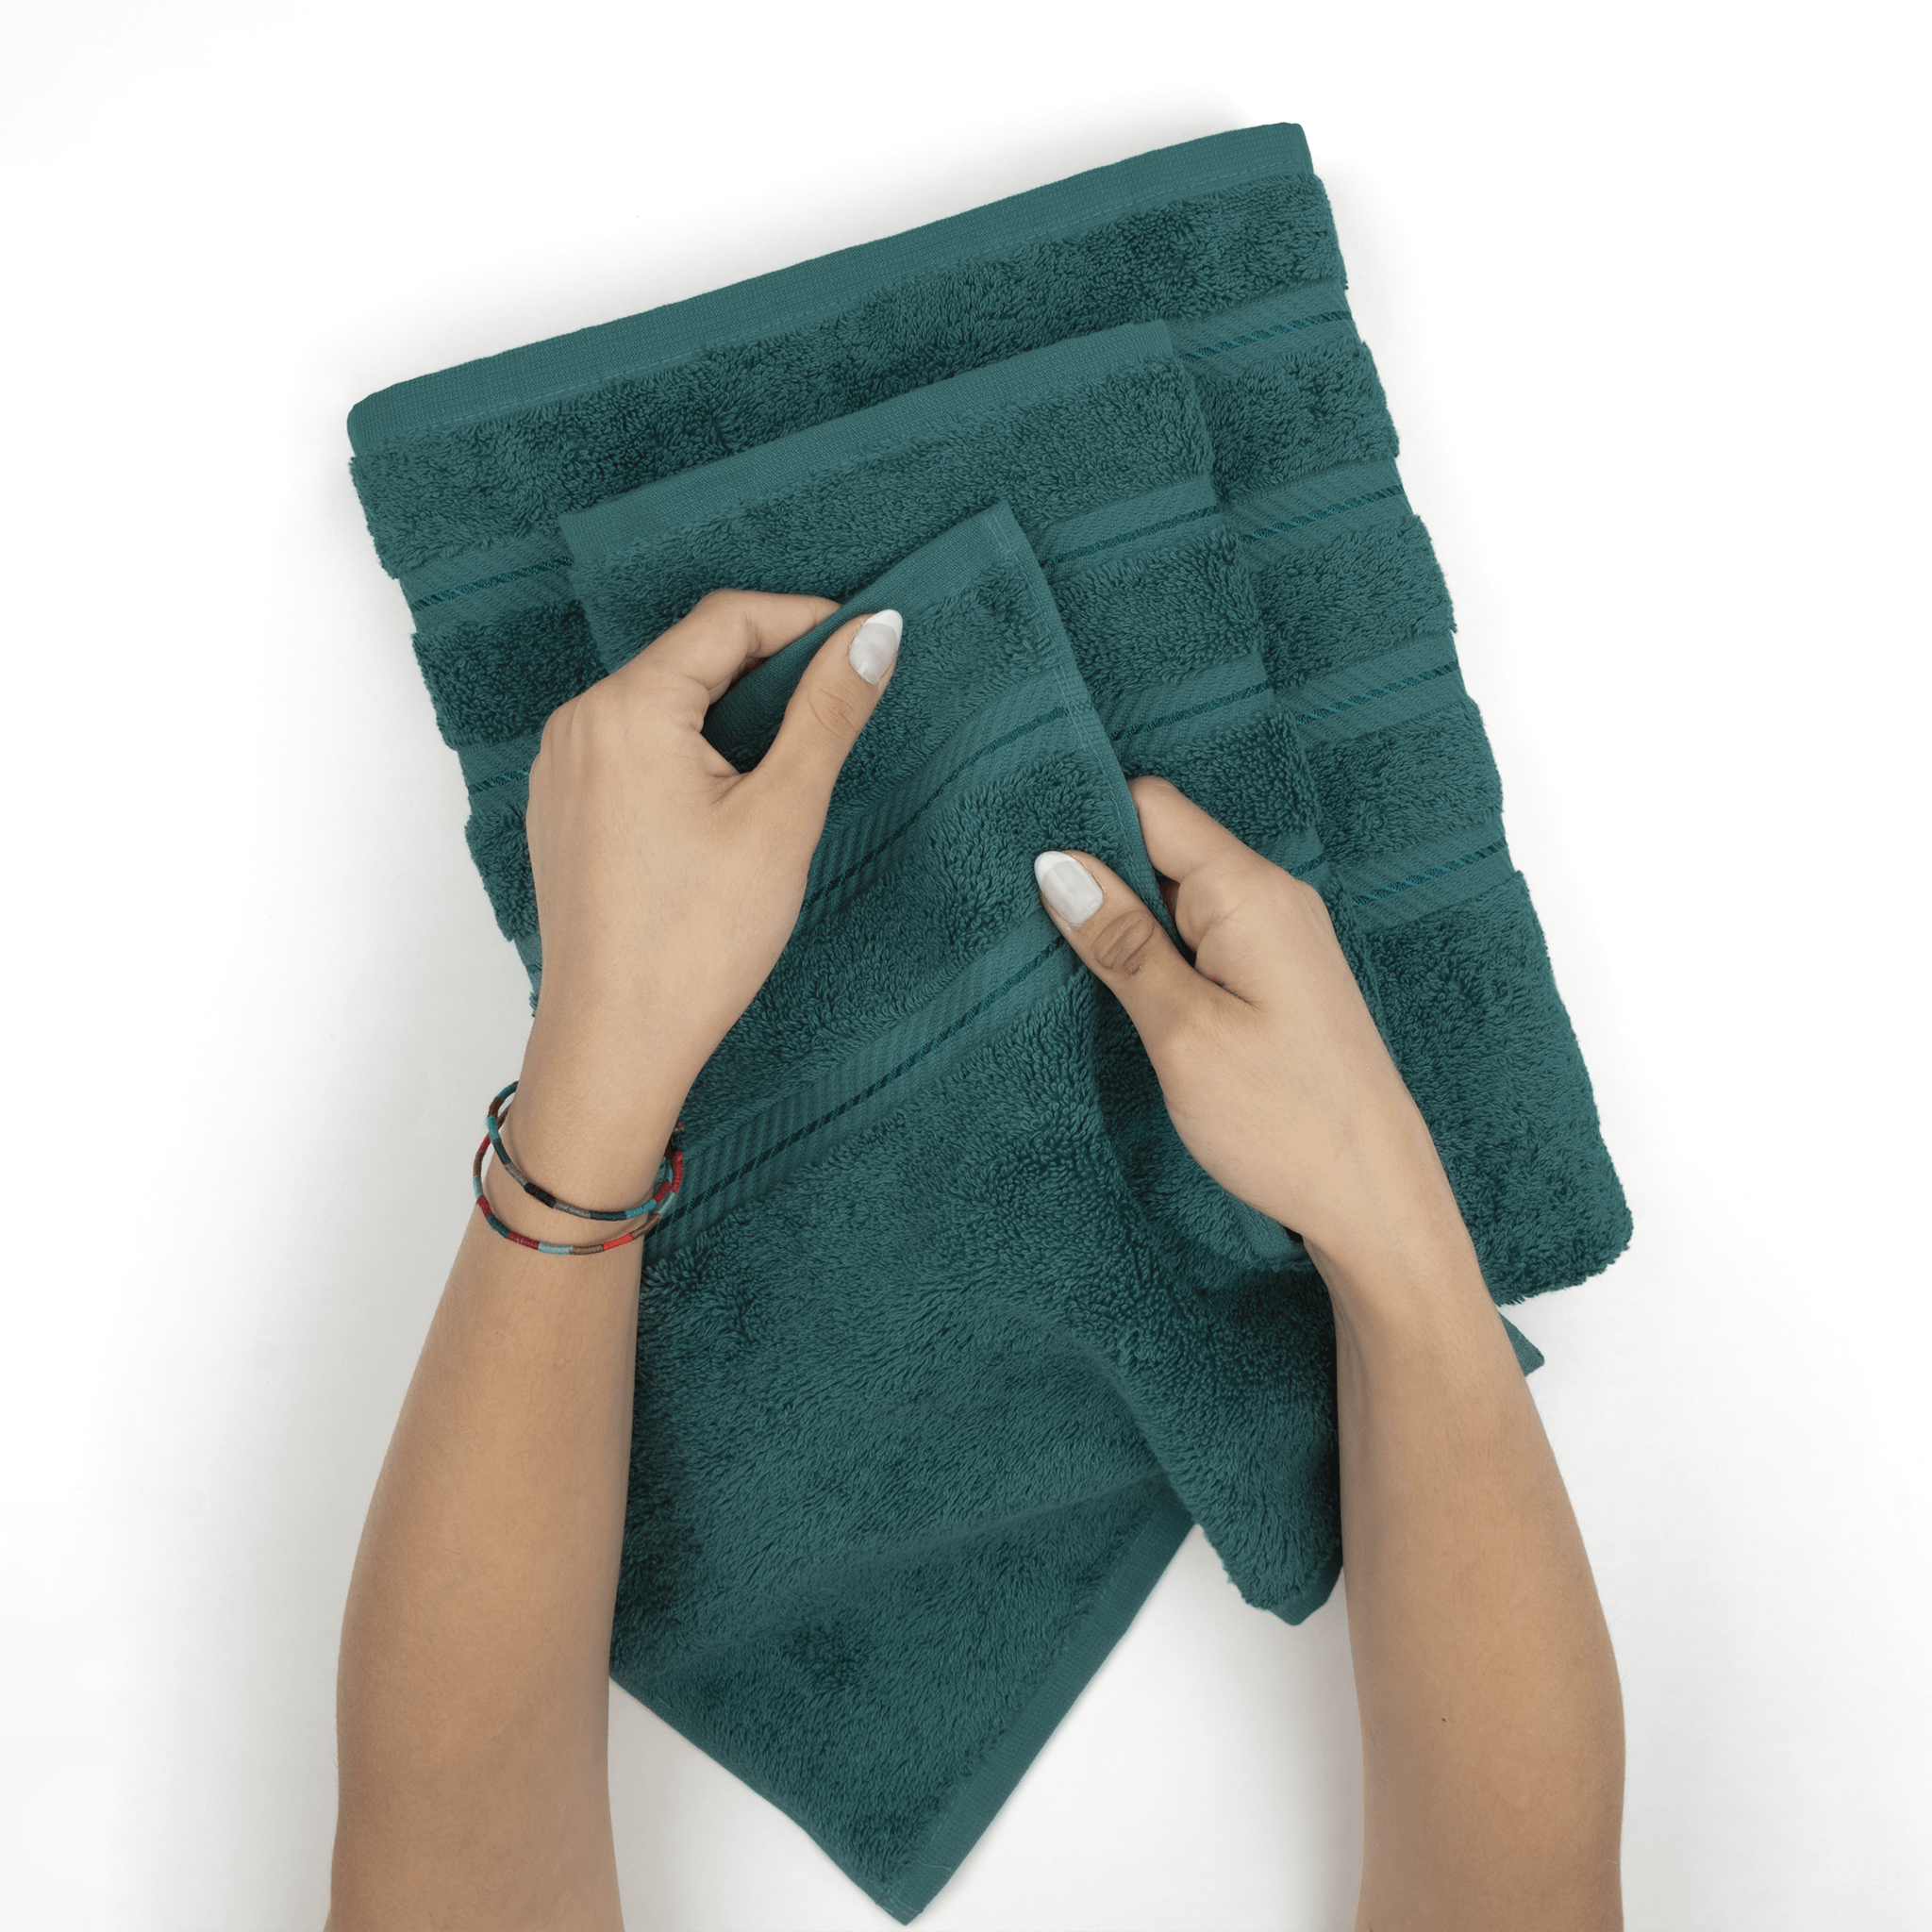 American Veteran Towel, Towels for Bathroom, 6 Piece Towel Sets for  Clearance Prime, 100% Turkish Cotton Bathroom Towels, 2 Bath Towels 2 Hand  Towels